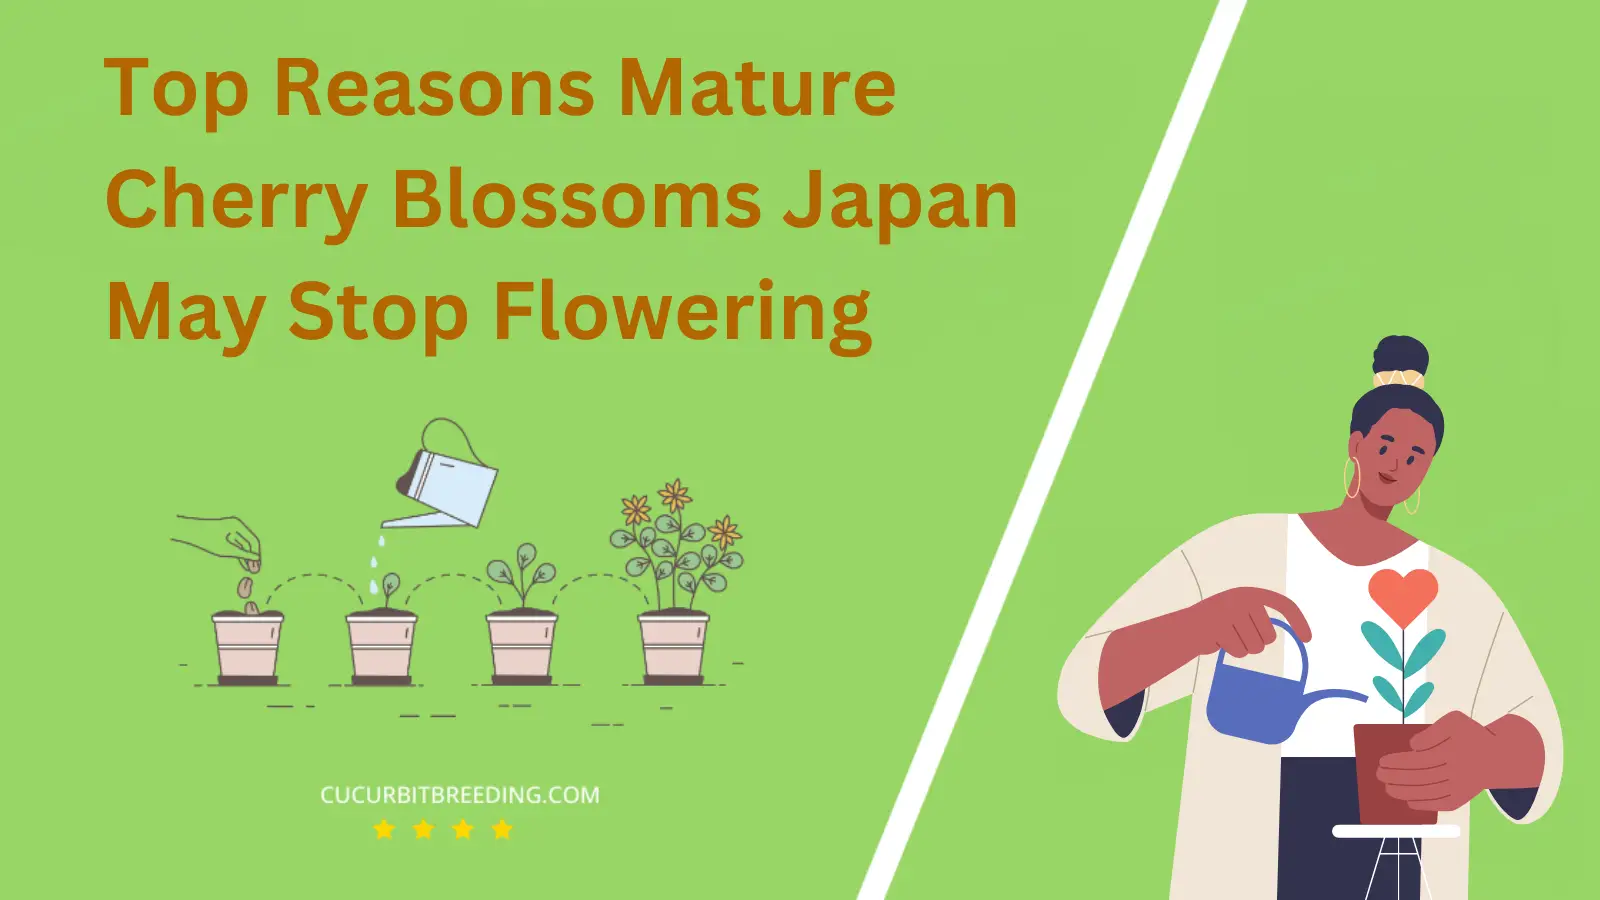 Top Reasons Mature Cherry Blossoms Japan May Stop Flowering